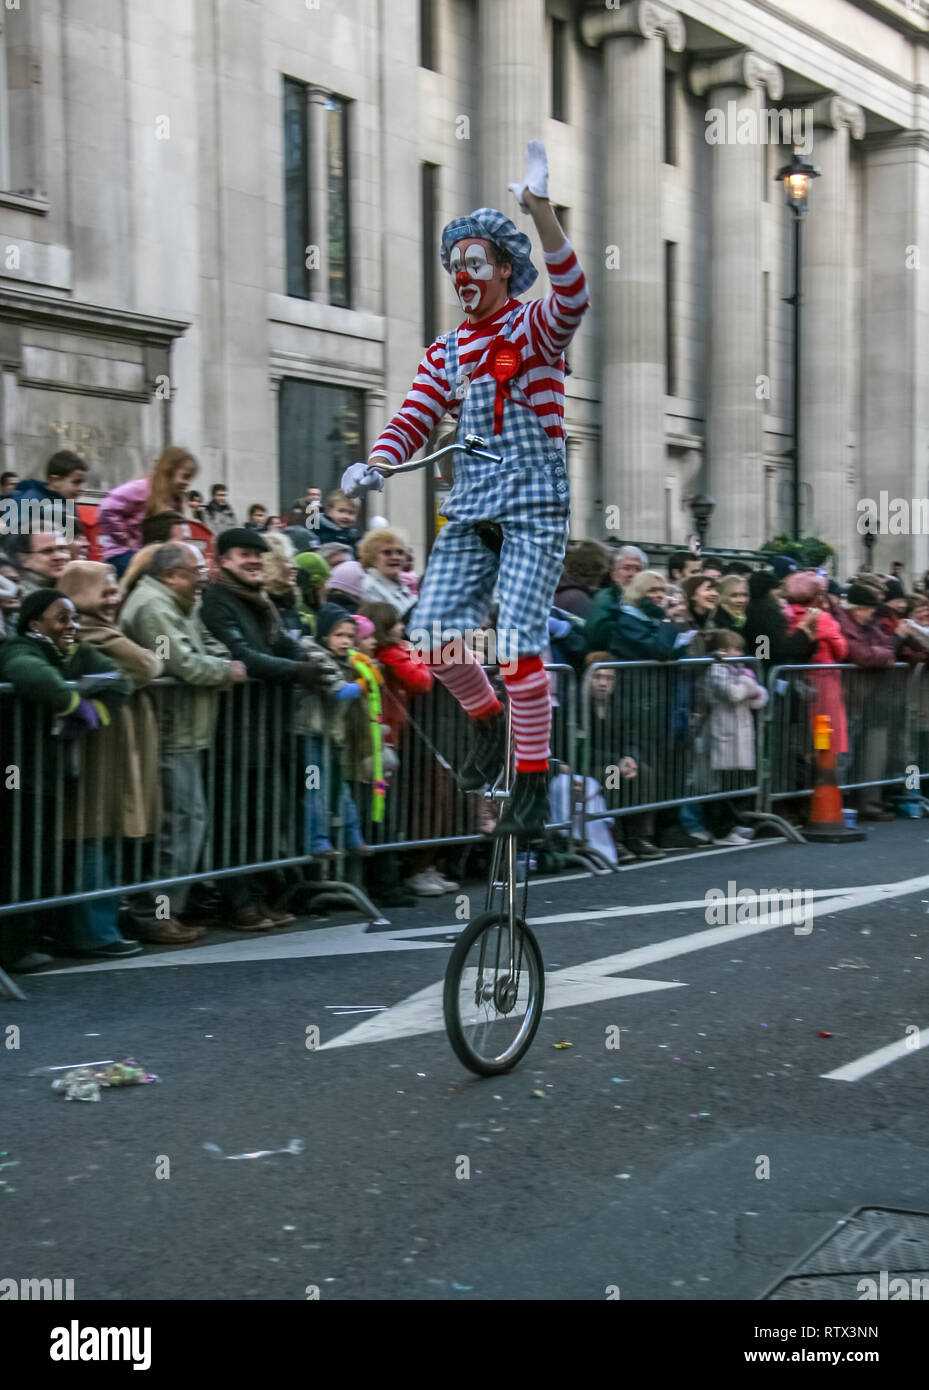 London, United Kingdom - January 1, 2007: Man in clown costume rides unicycle, and waves to cheering crowd, during New Year's Day Parade. Stock Photo